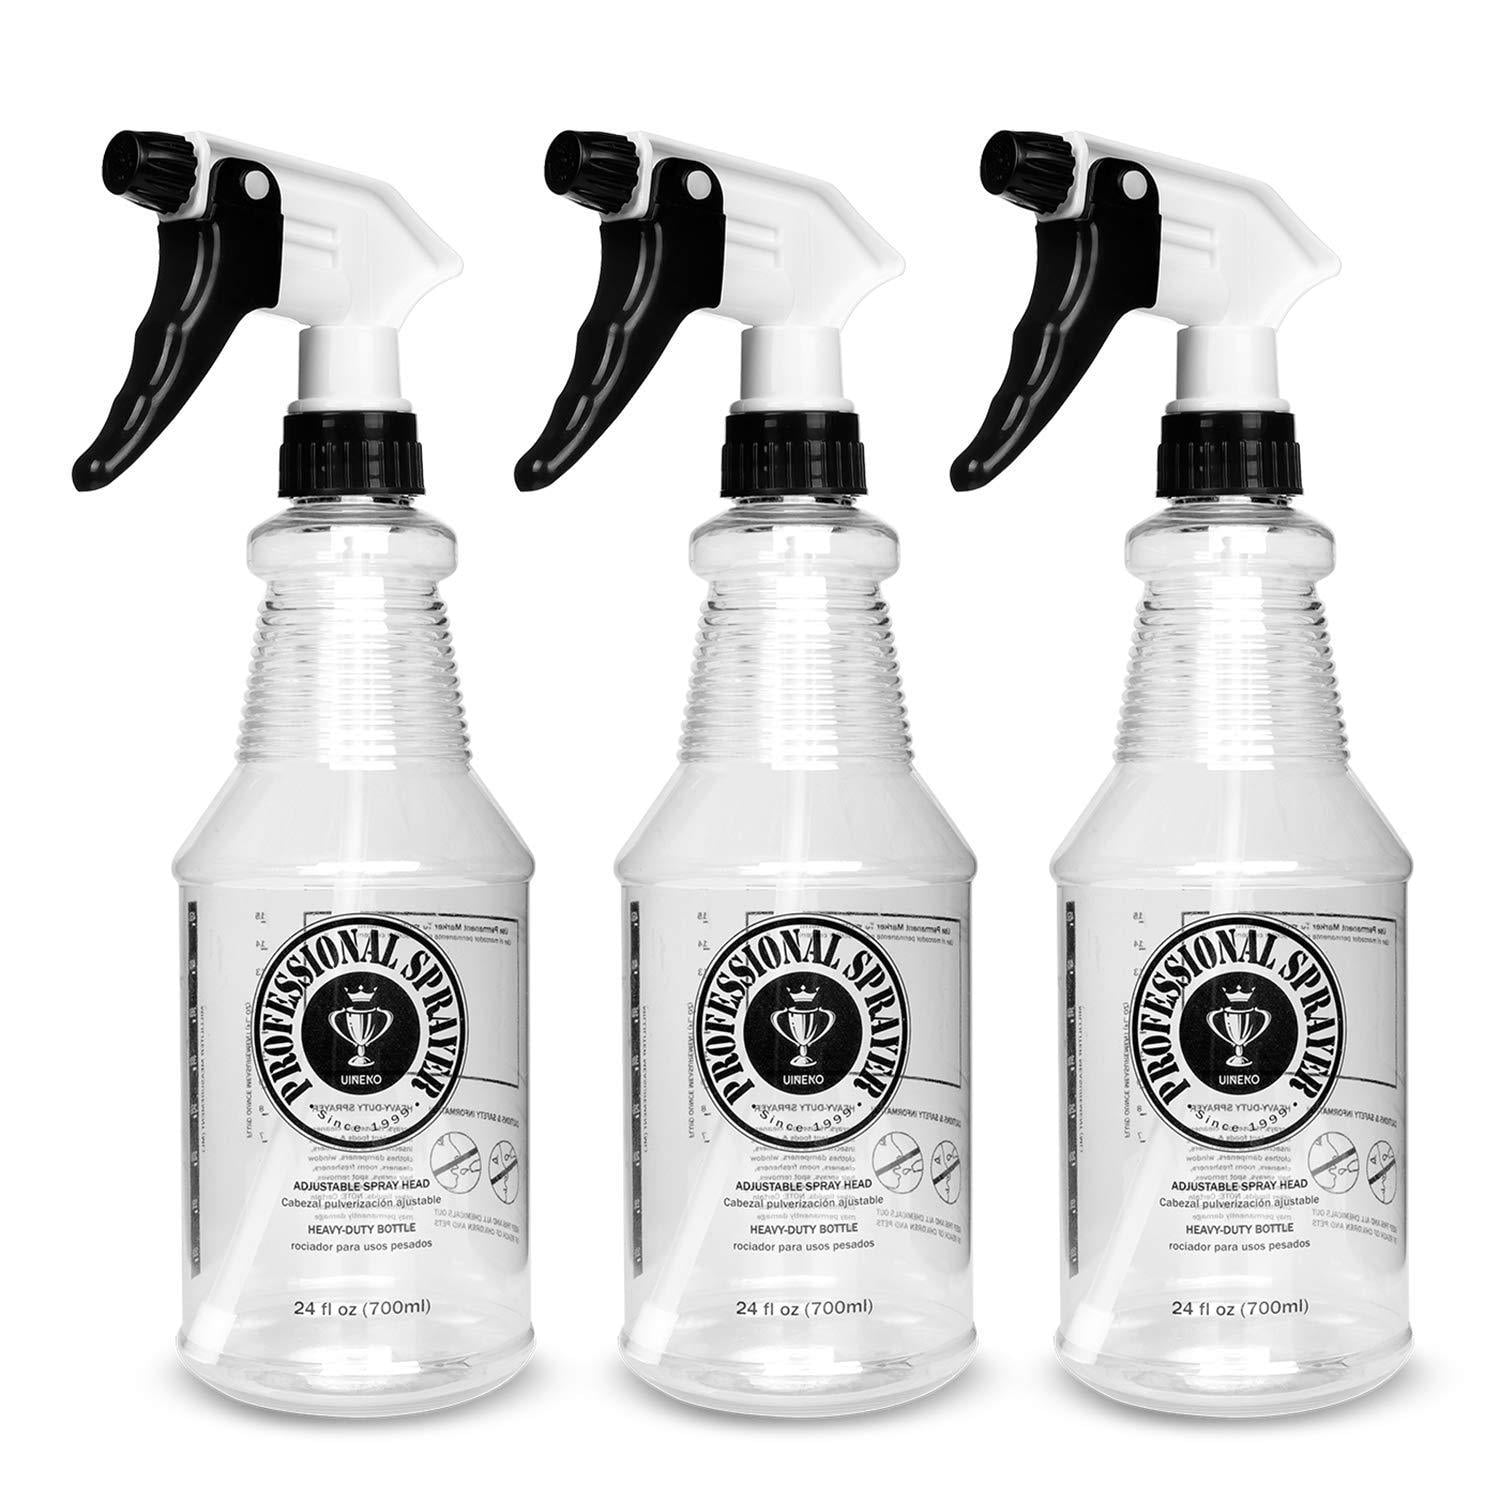 Plastic Spray Bottles 16 oz Leak Proof Water Fine Mist Sprayer Empty Bottle for Cleaning Solutions Auto Detailing Plants Bathroom and Kitchen 6 Pack